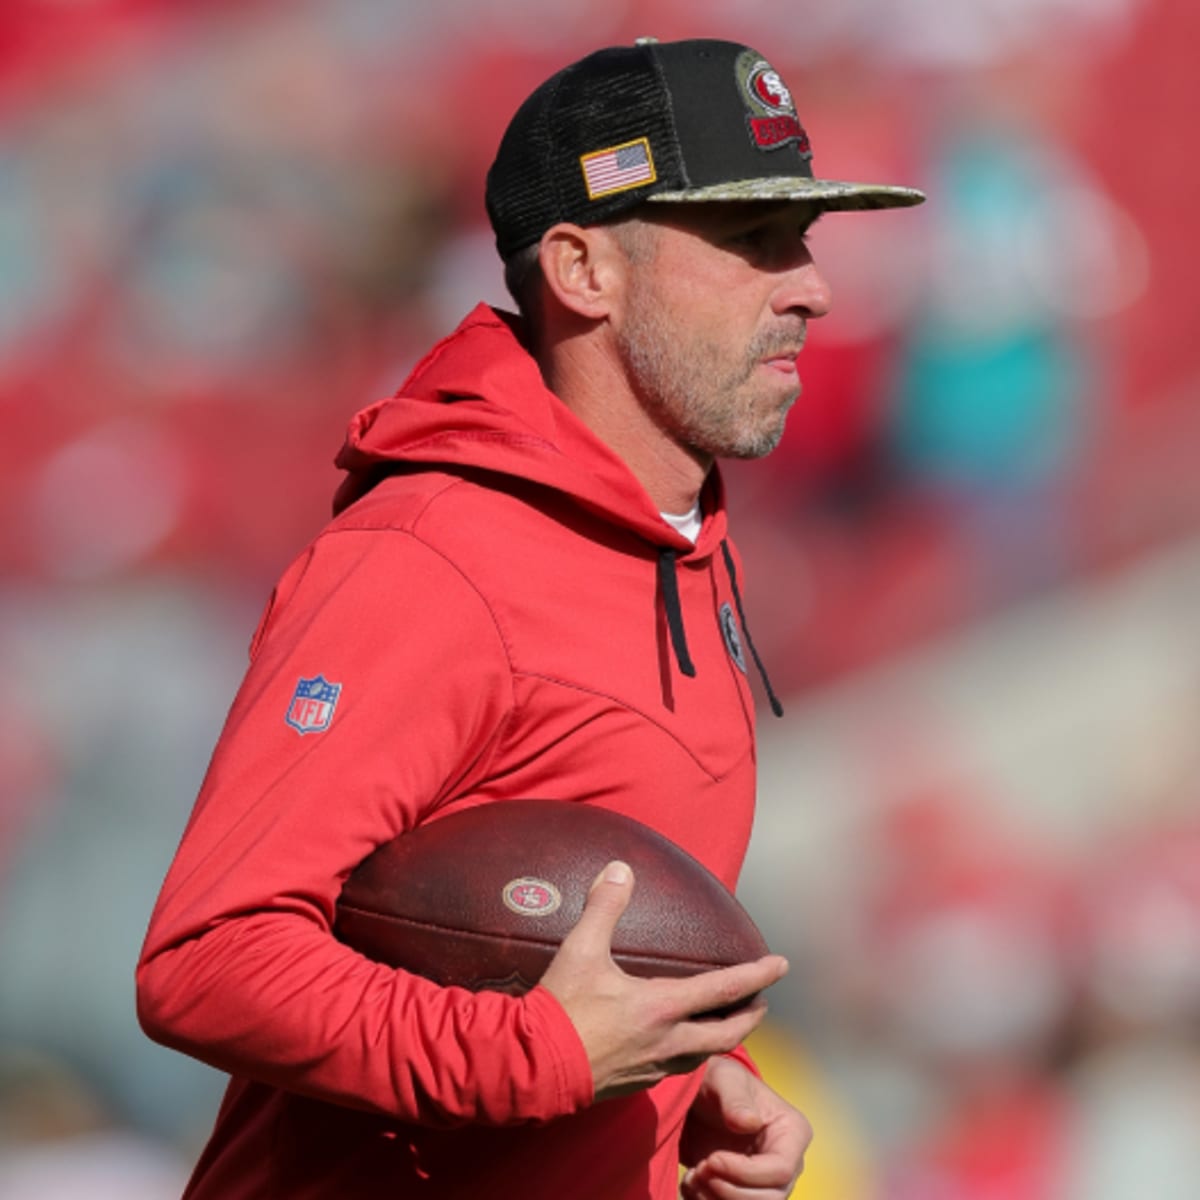 kyle shanahan hat today